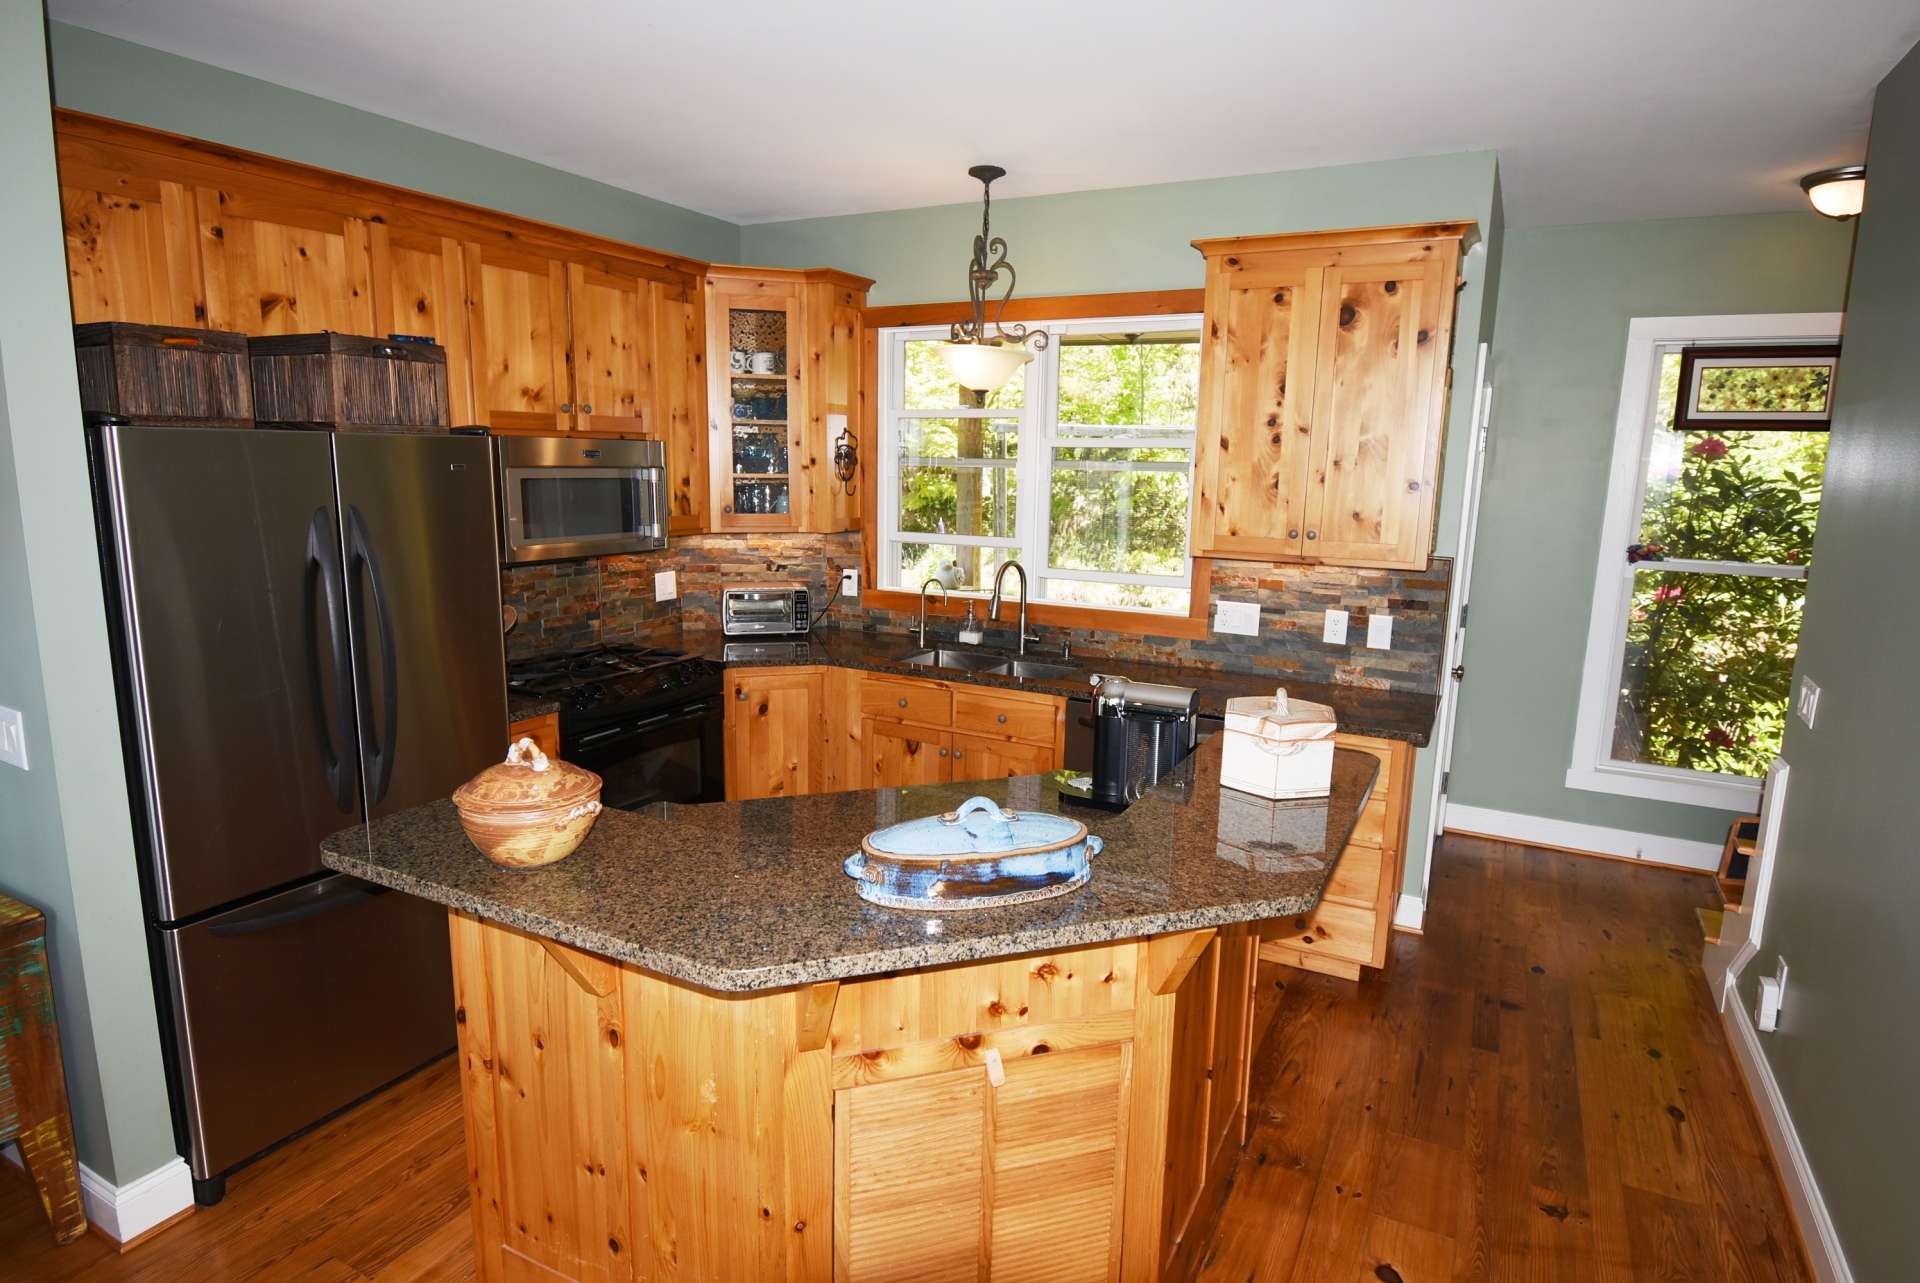 The cozy space saving kitchen features custom cabinetry, stainless appliances, a center work island with casual dining area and ample storage space. The kitchen also has access to a covered porch to relax with morning's first cup of coffee.